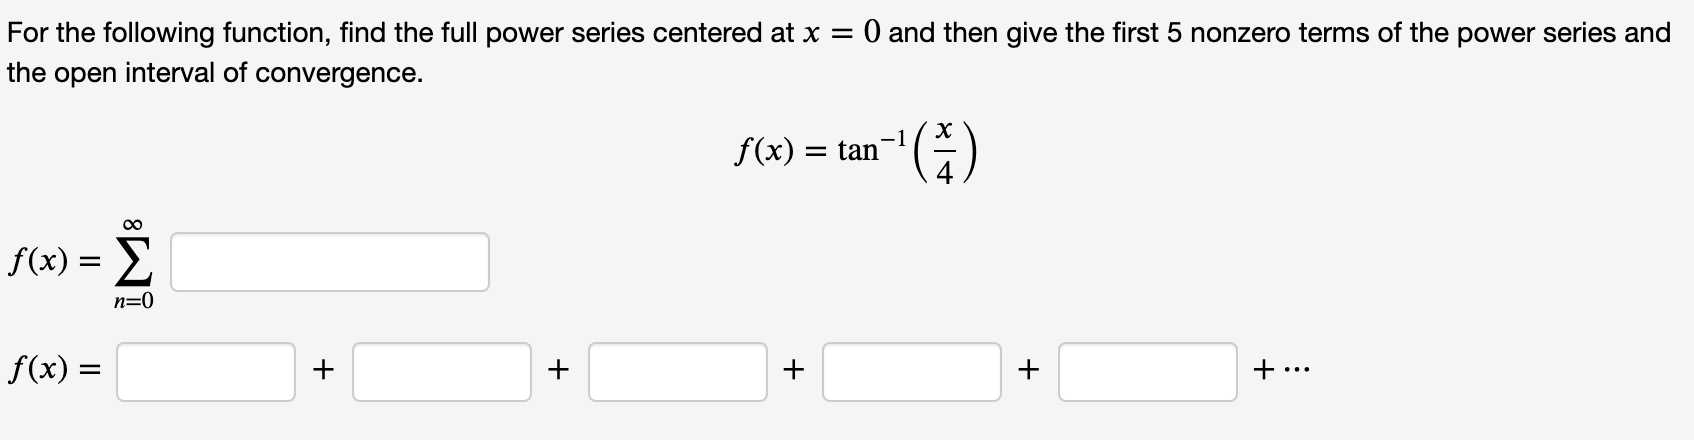 O and then give the first 5 nonzero terms of the power series and
For the following function, find the full power series centered at x =
the open interval of convergence.
-1
f(x) = tan
f(x) = E
n=0
f(x) =
+
+
+ ...
